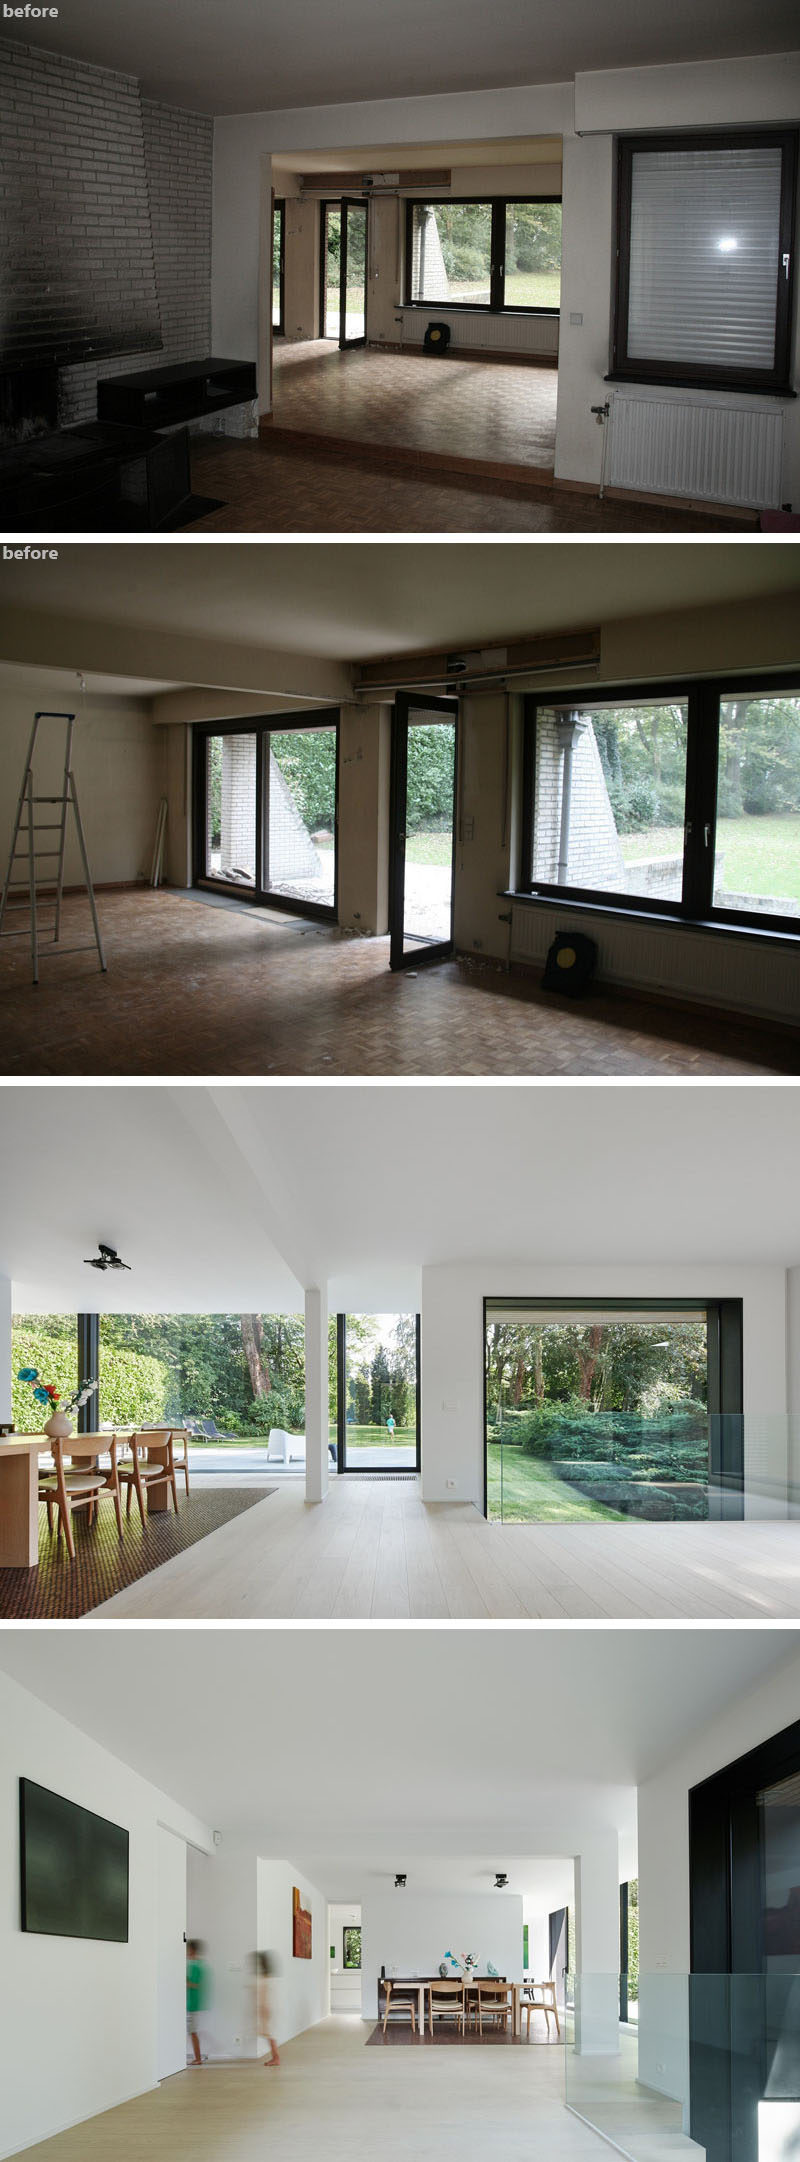 Before & After - The living areas were separated and didn't take advantage of beautiful backyard views, now the interiors have been opened up and are bright white, making the space feel modern and allowing you to focus on the plants outside.